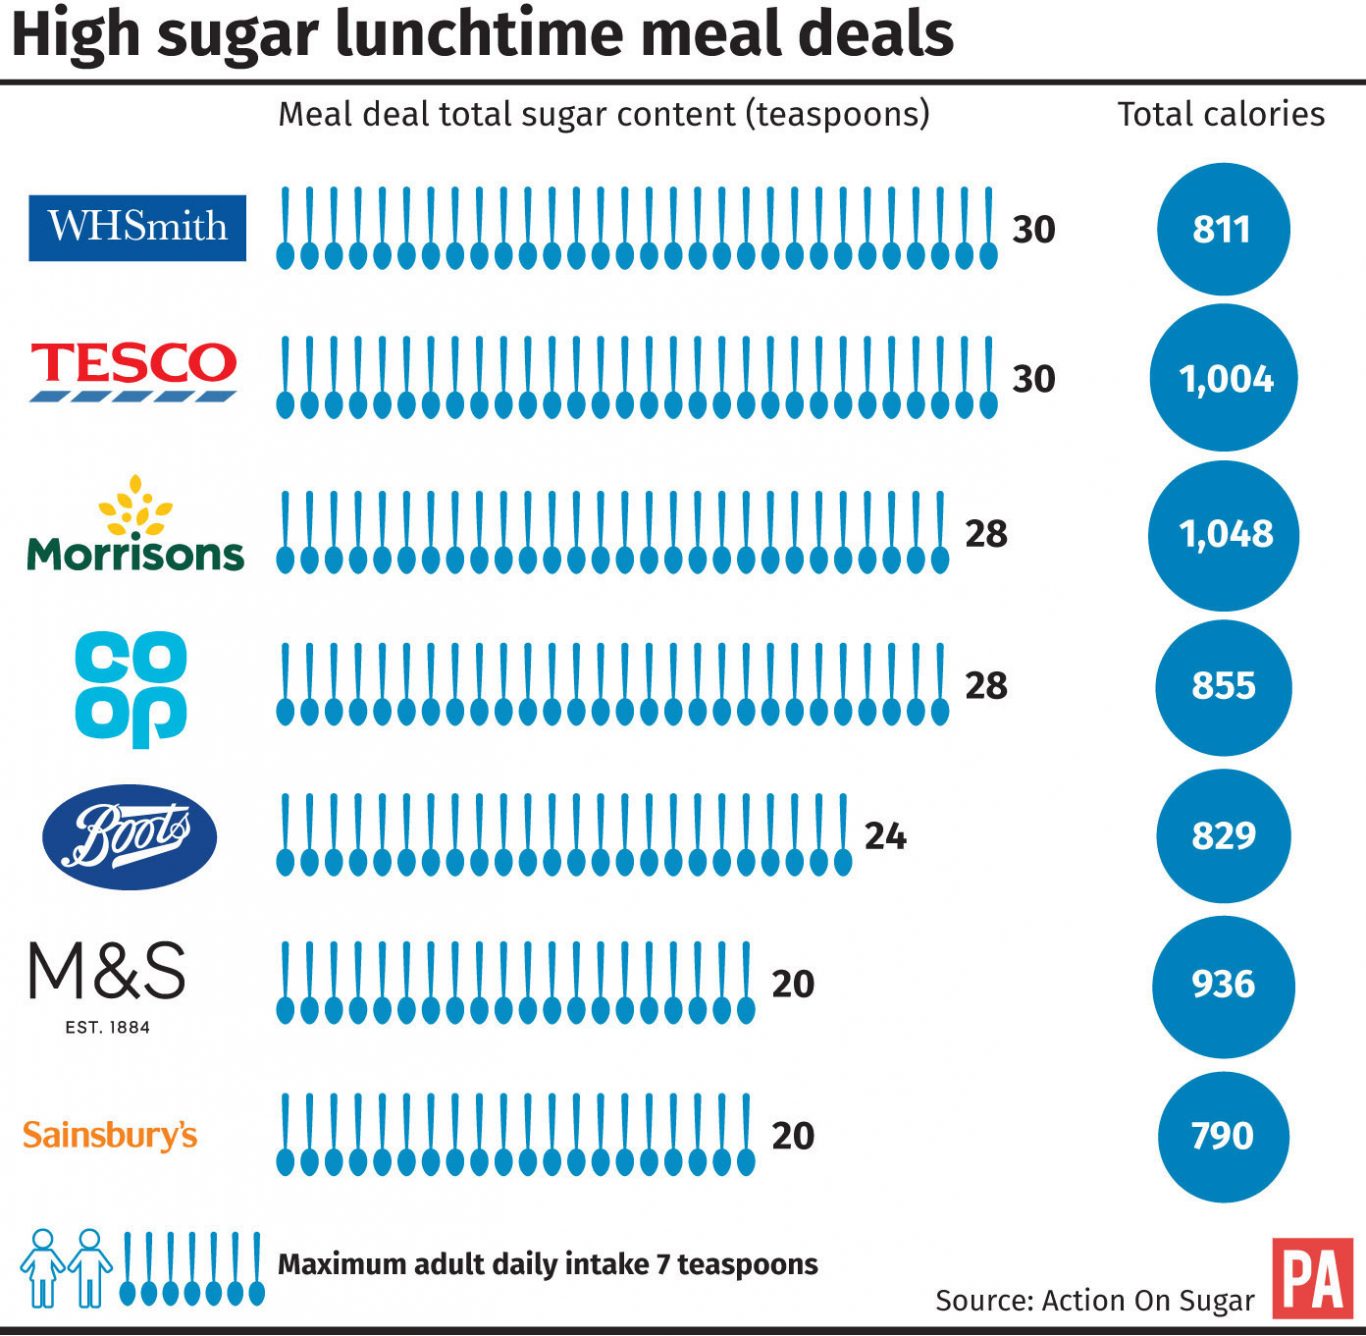 Lunchtime meal deals with the highest sugar content.